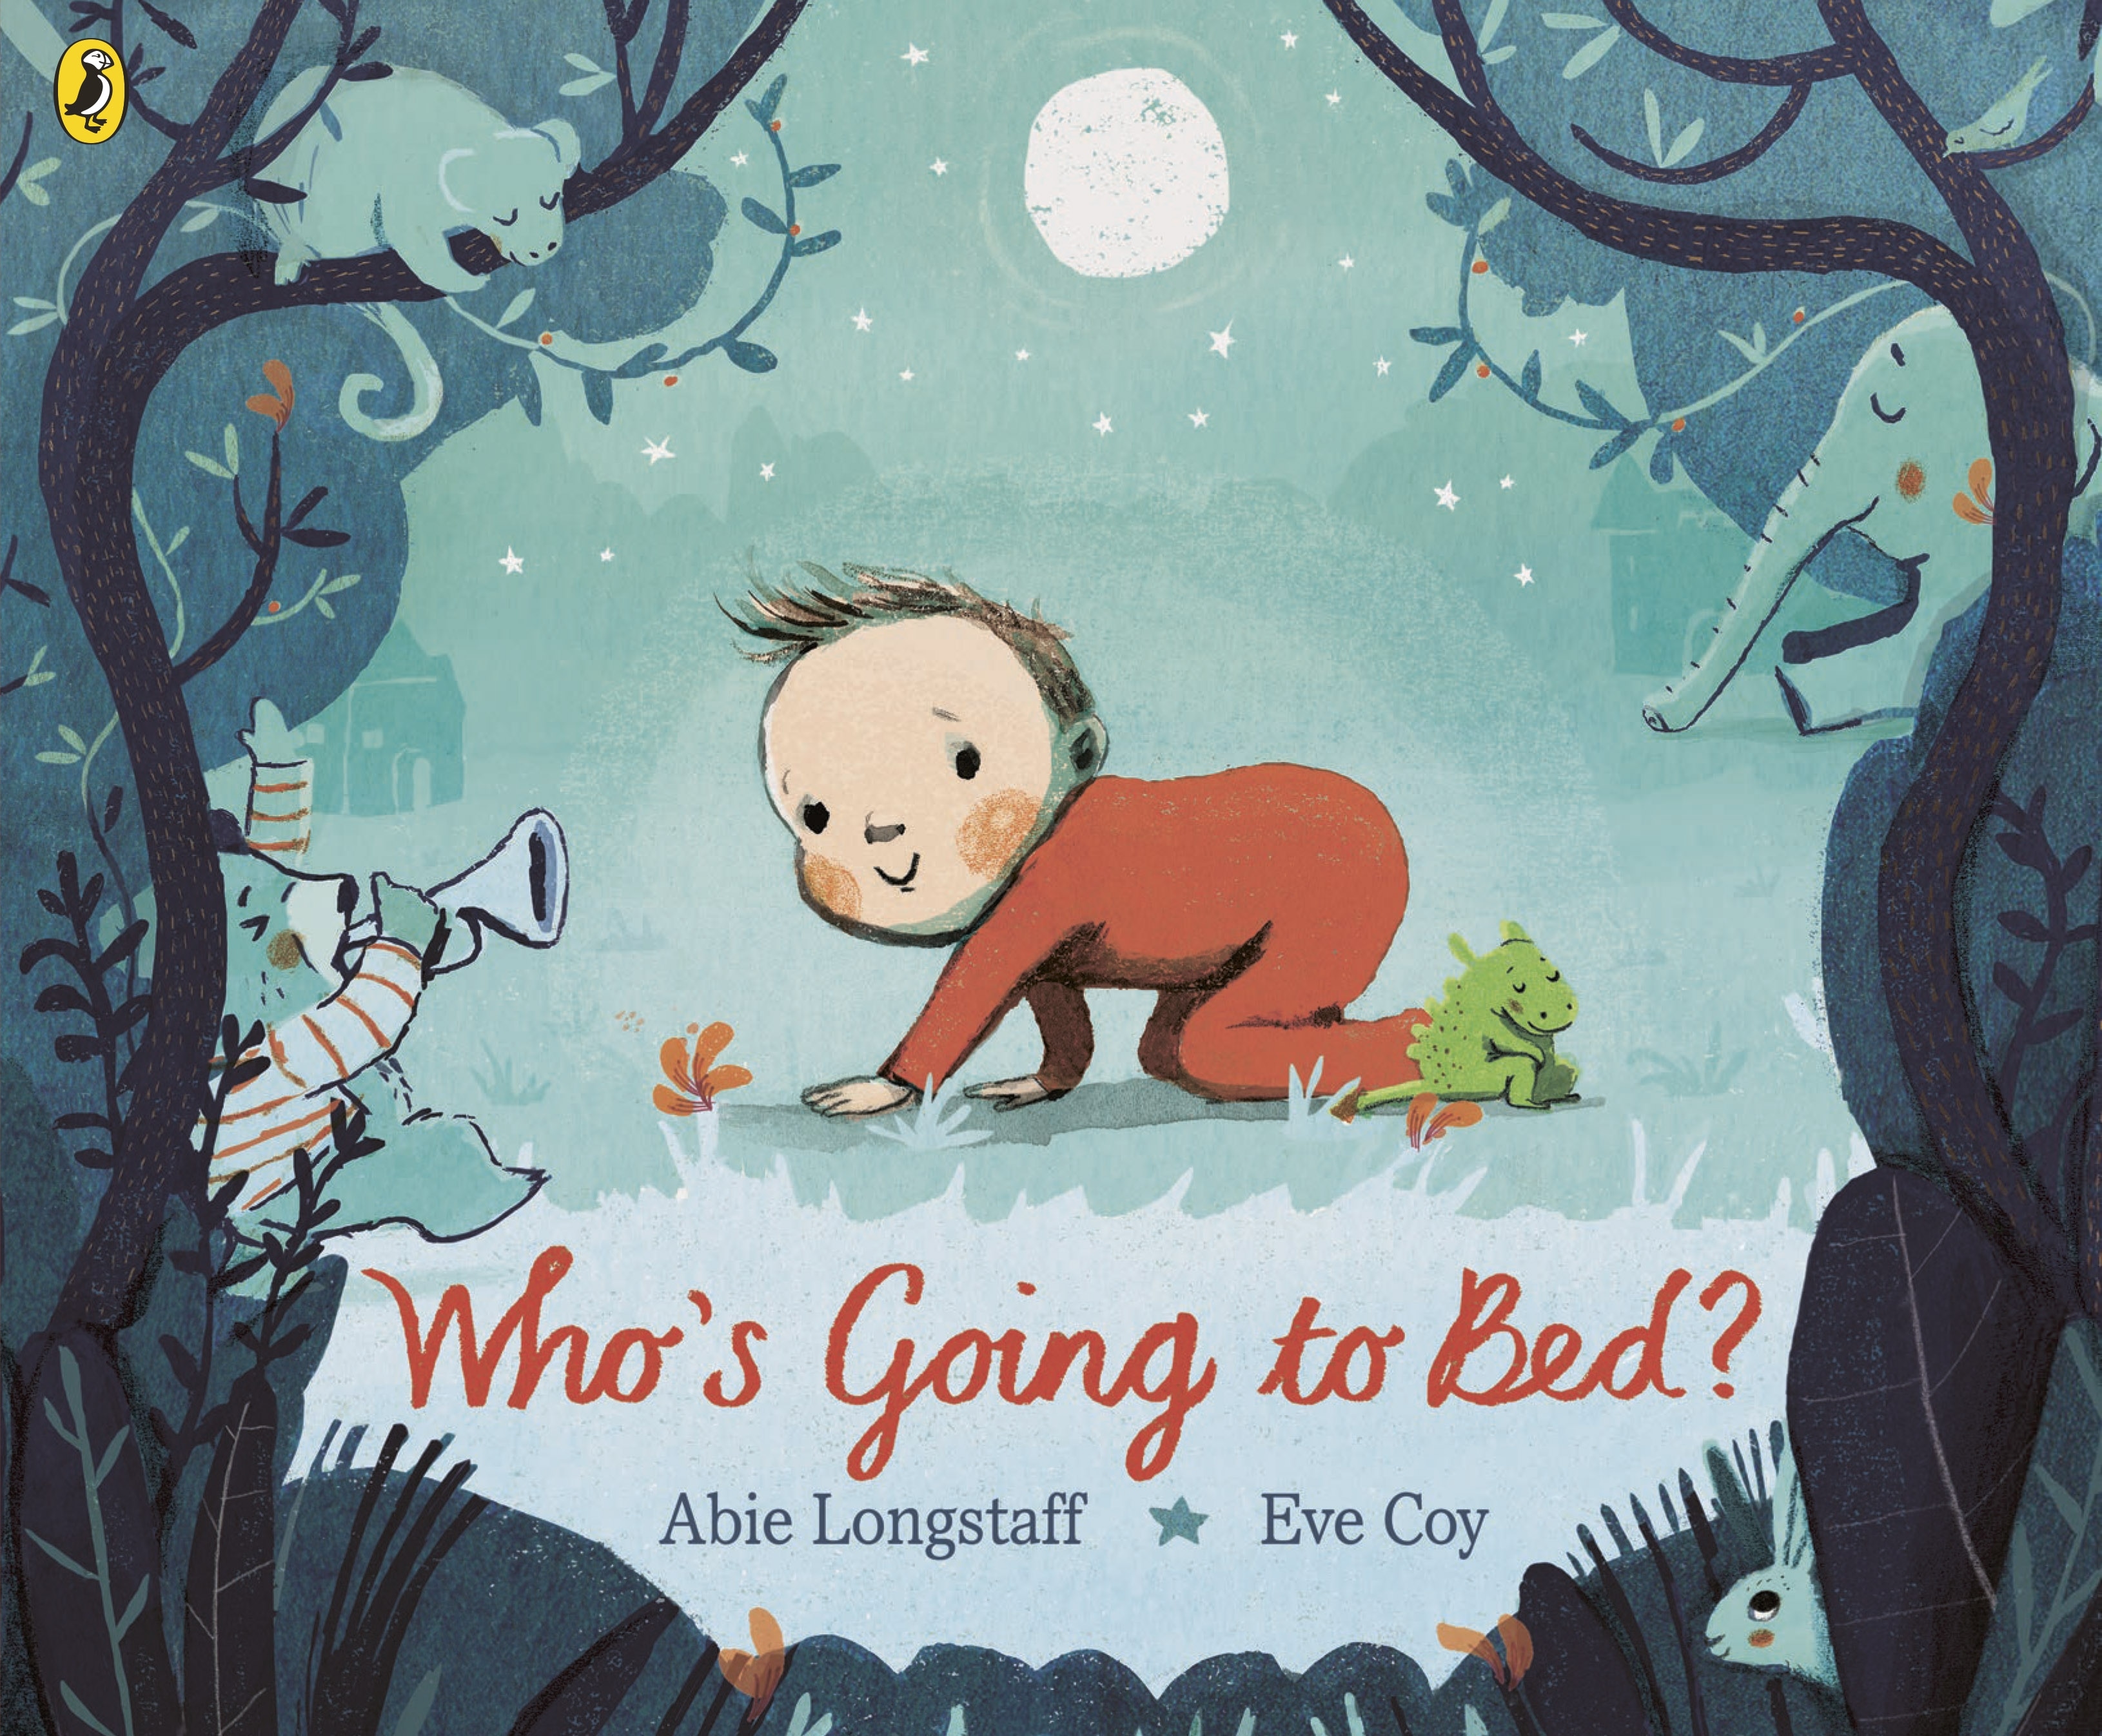 Book “Who's Going to Bed?” by Abie Longstaff — July 4, 2019